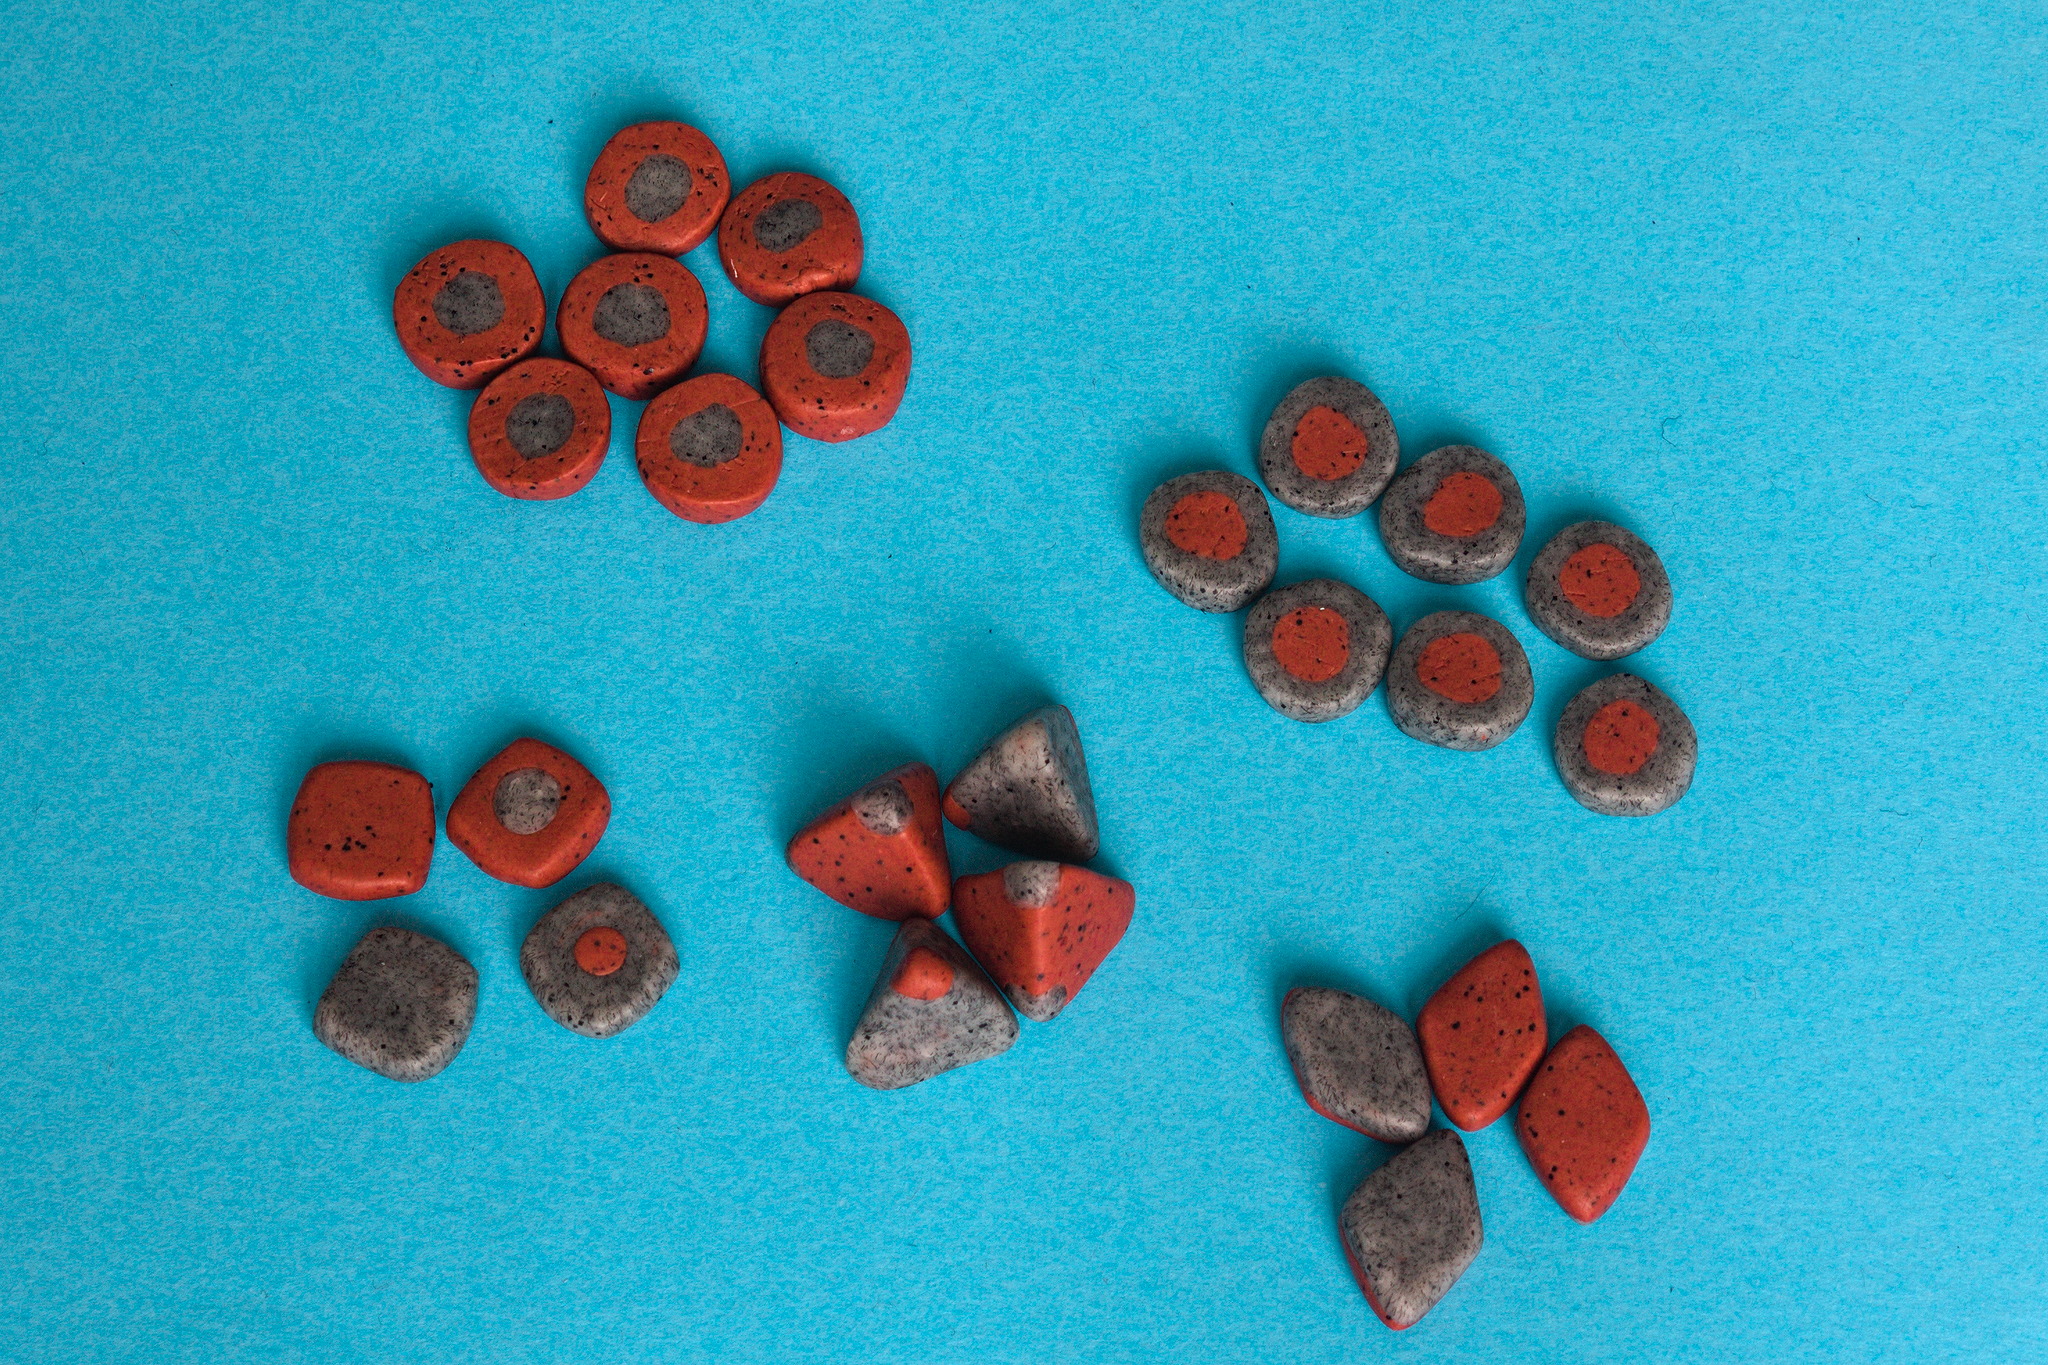 A set of red and grey tokens, tetrahedron dice, coins with
one side marked with a dot that are square-ish rather than
circular and four lozenge-shaped coins with each side of a
different colour.